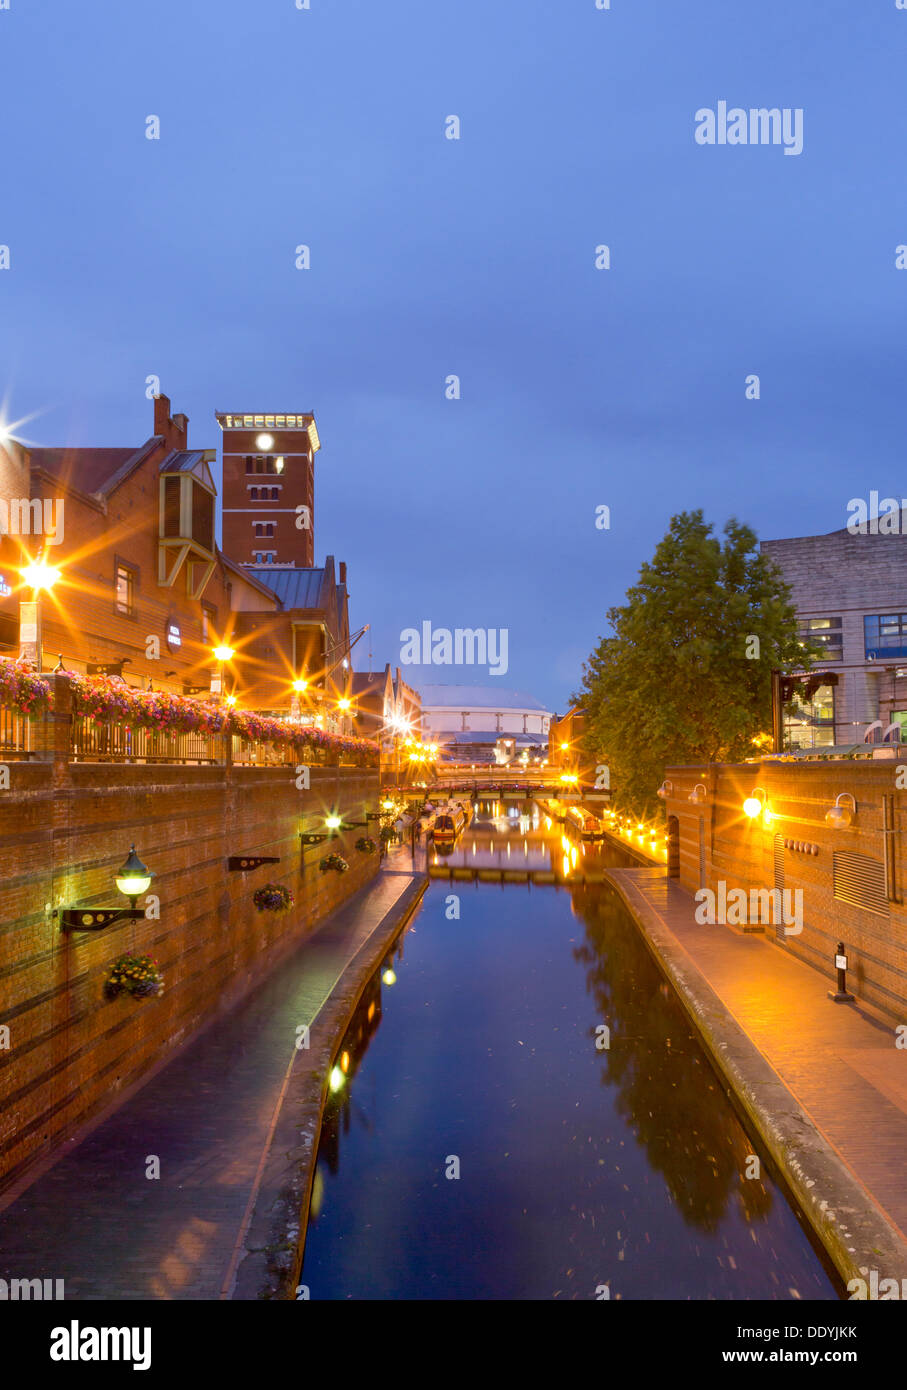 Canals at night near to Brindleyplace, Birmingham, West Midlands, England, UK Stock Photo